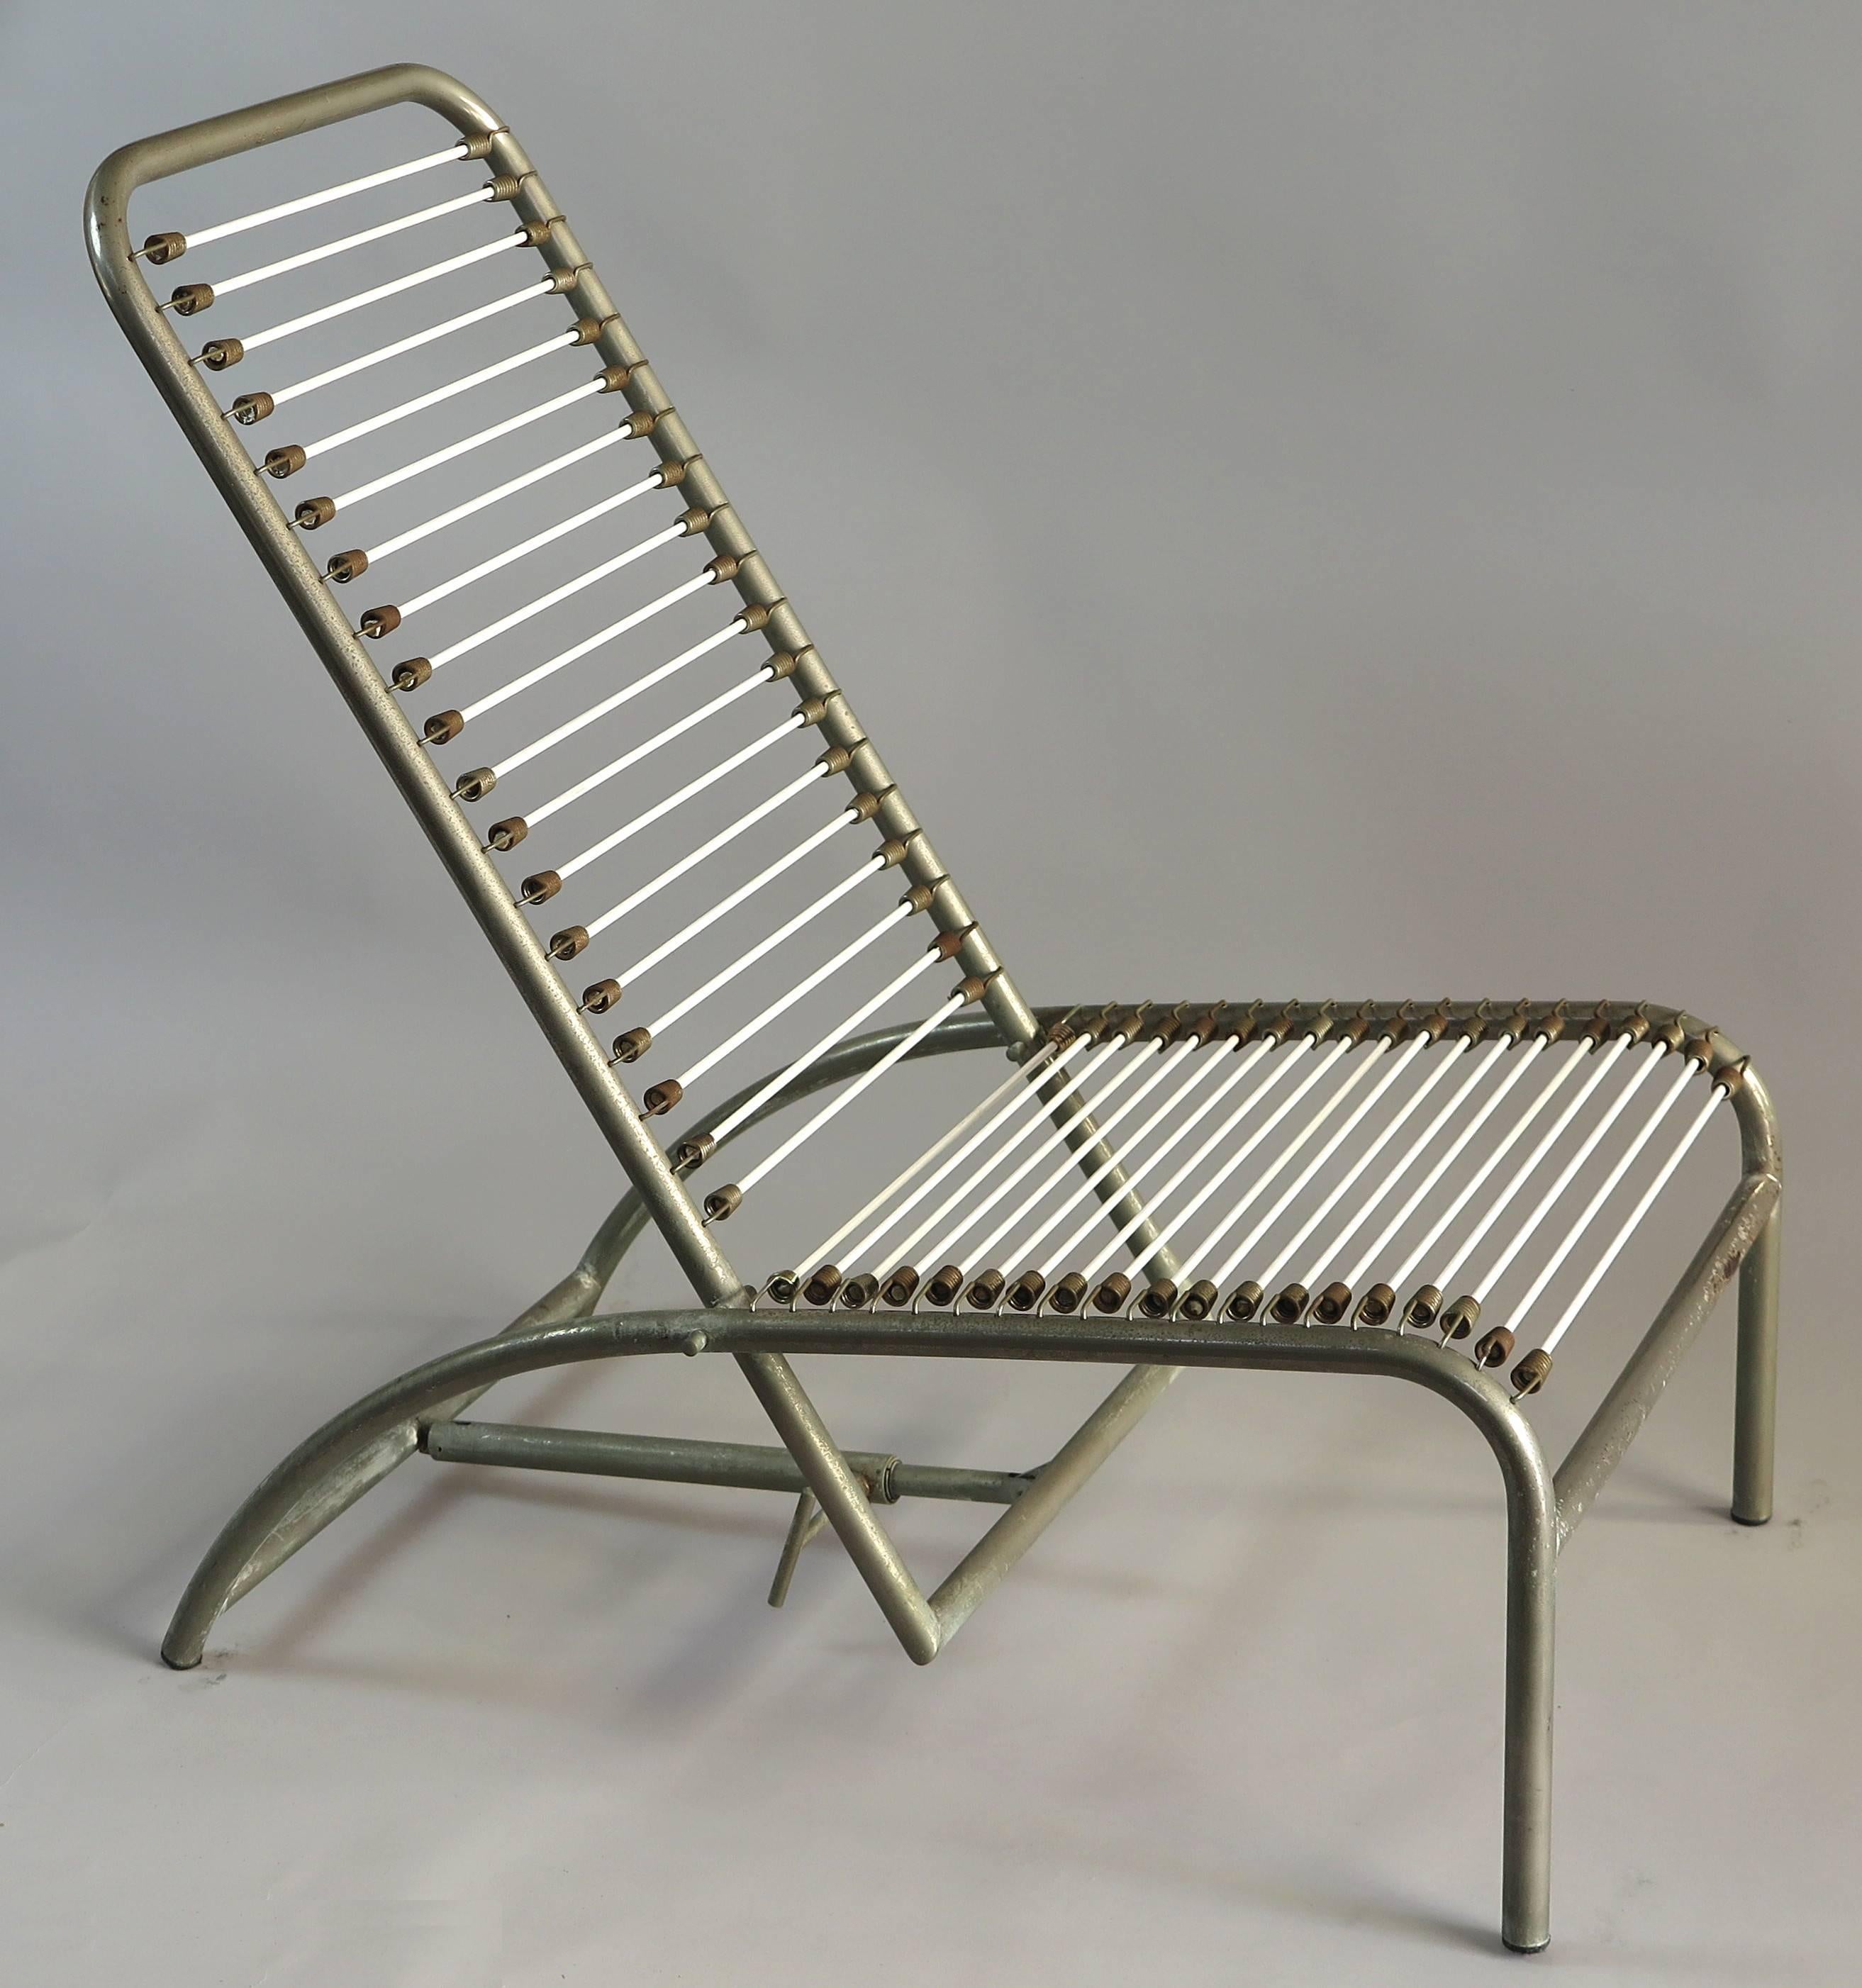 French designer and interior architect René Herbst designed in the 1920s several Sandows chairs. This comfortable chair has an adjustable back
and was produced, circa 1960, nickel-plated steel with patina. The Sandows have been replaced, as well